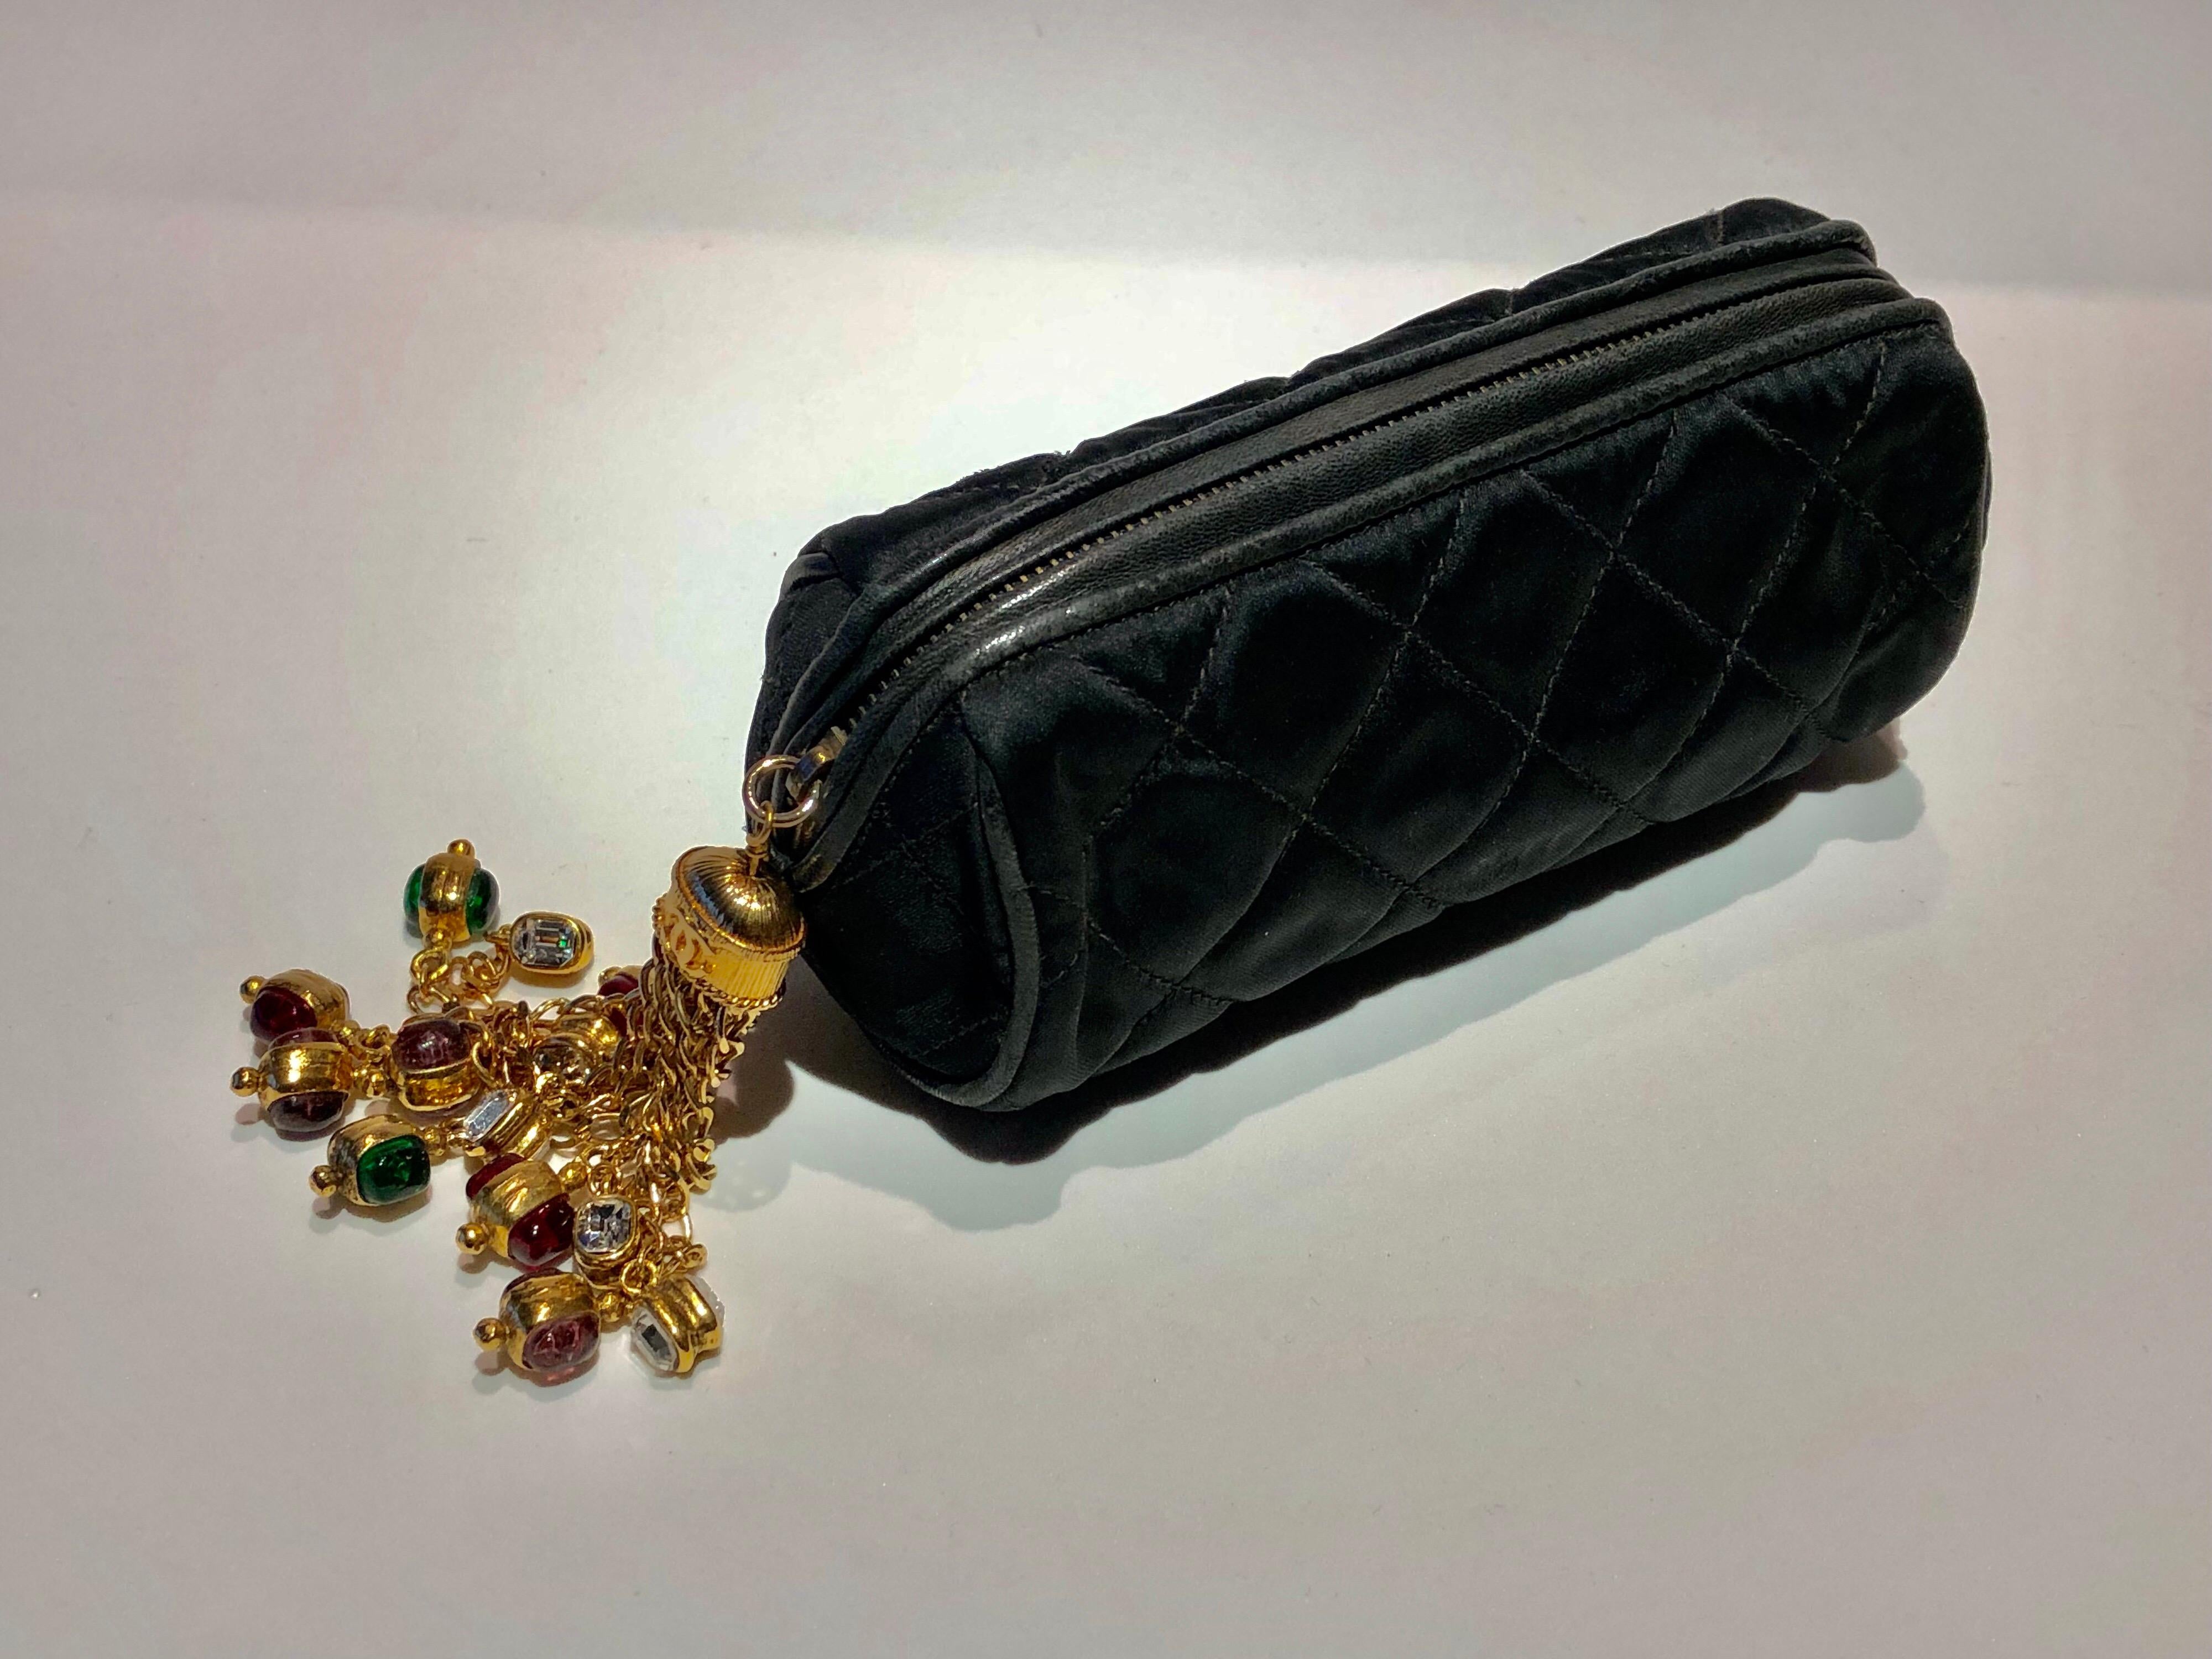 Extremely scarce vintage Chanel black satin-silk and leather 